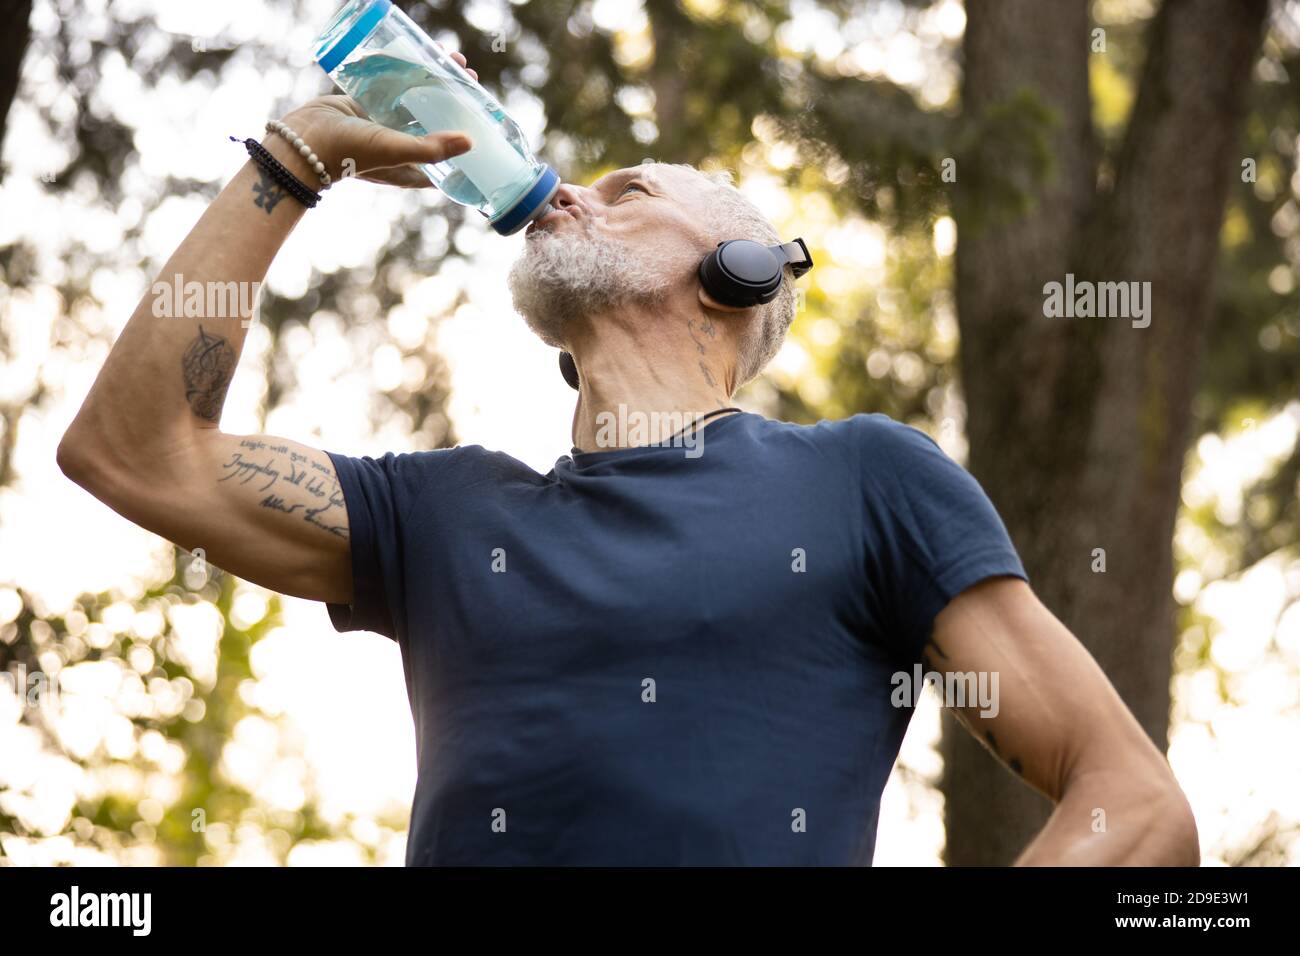 Athletic male quenching thirst during workout outdoors Stock Photo